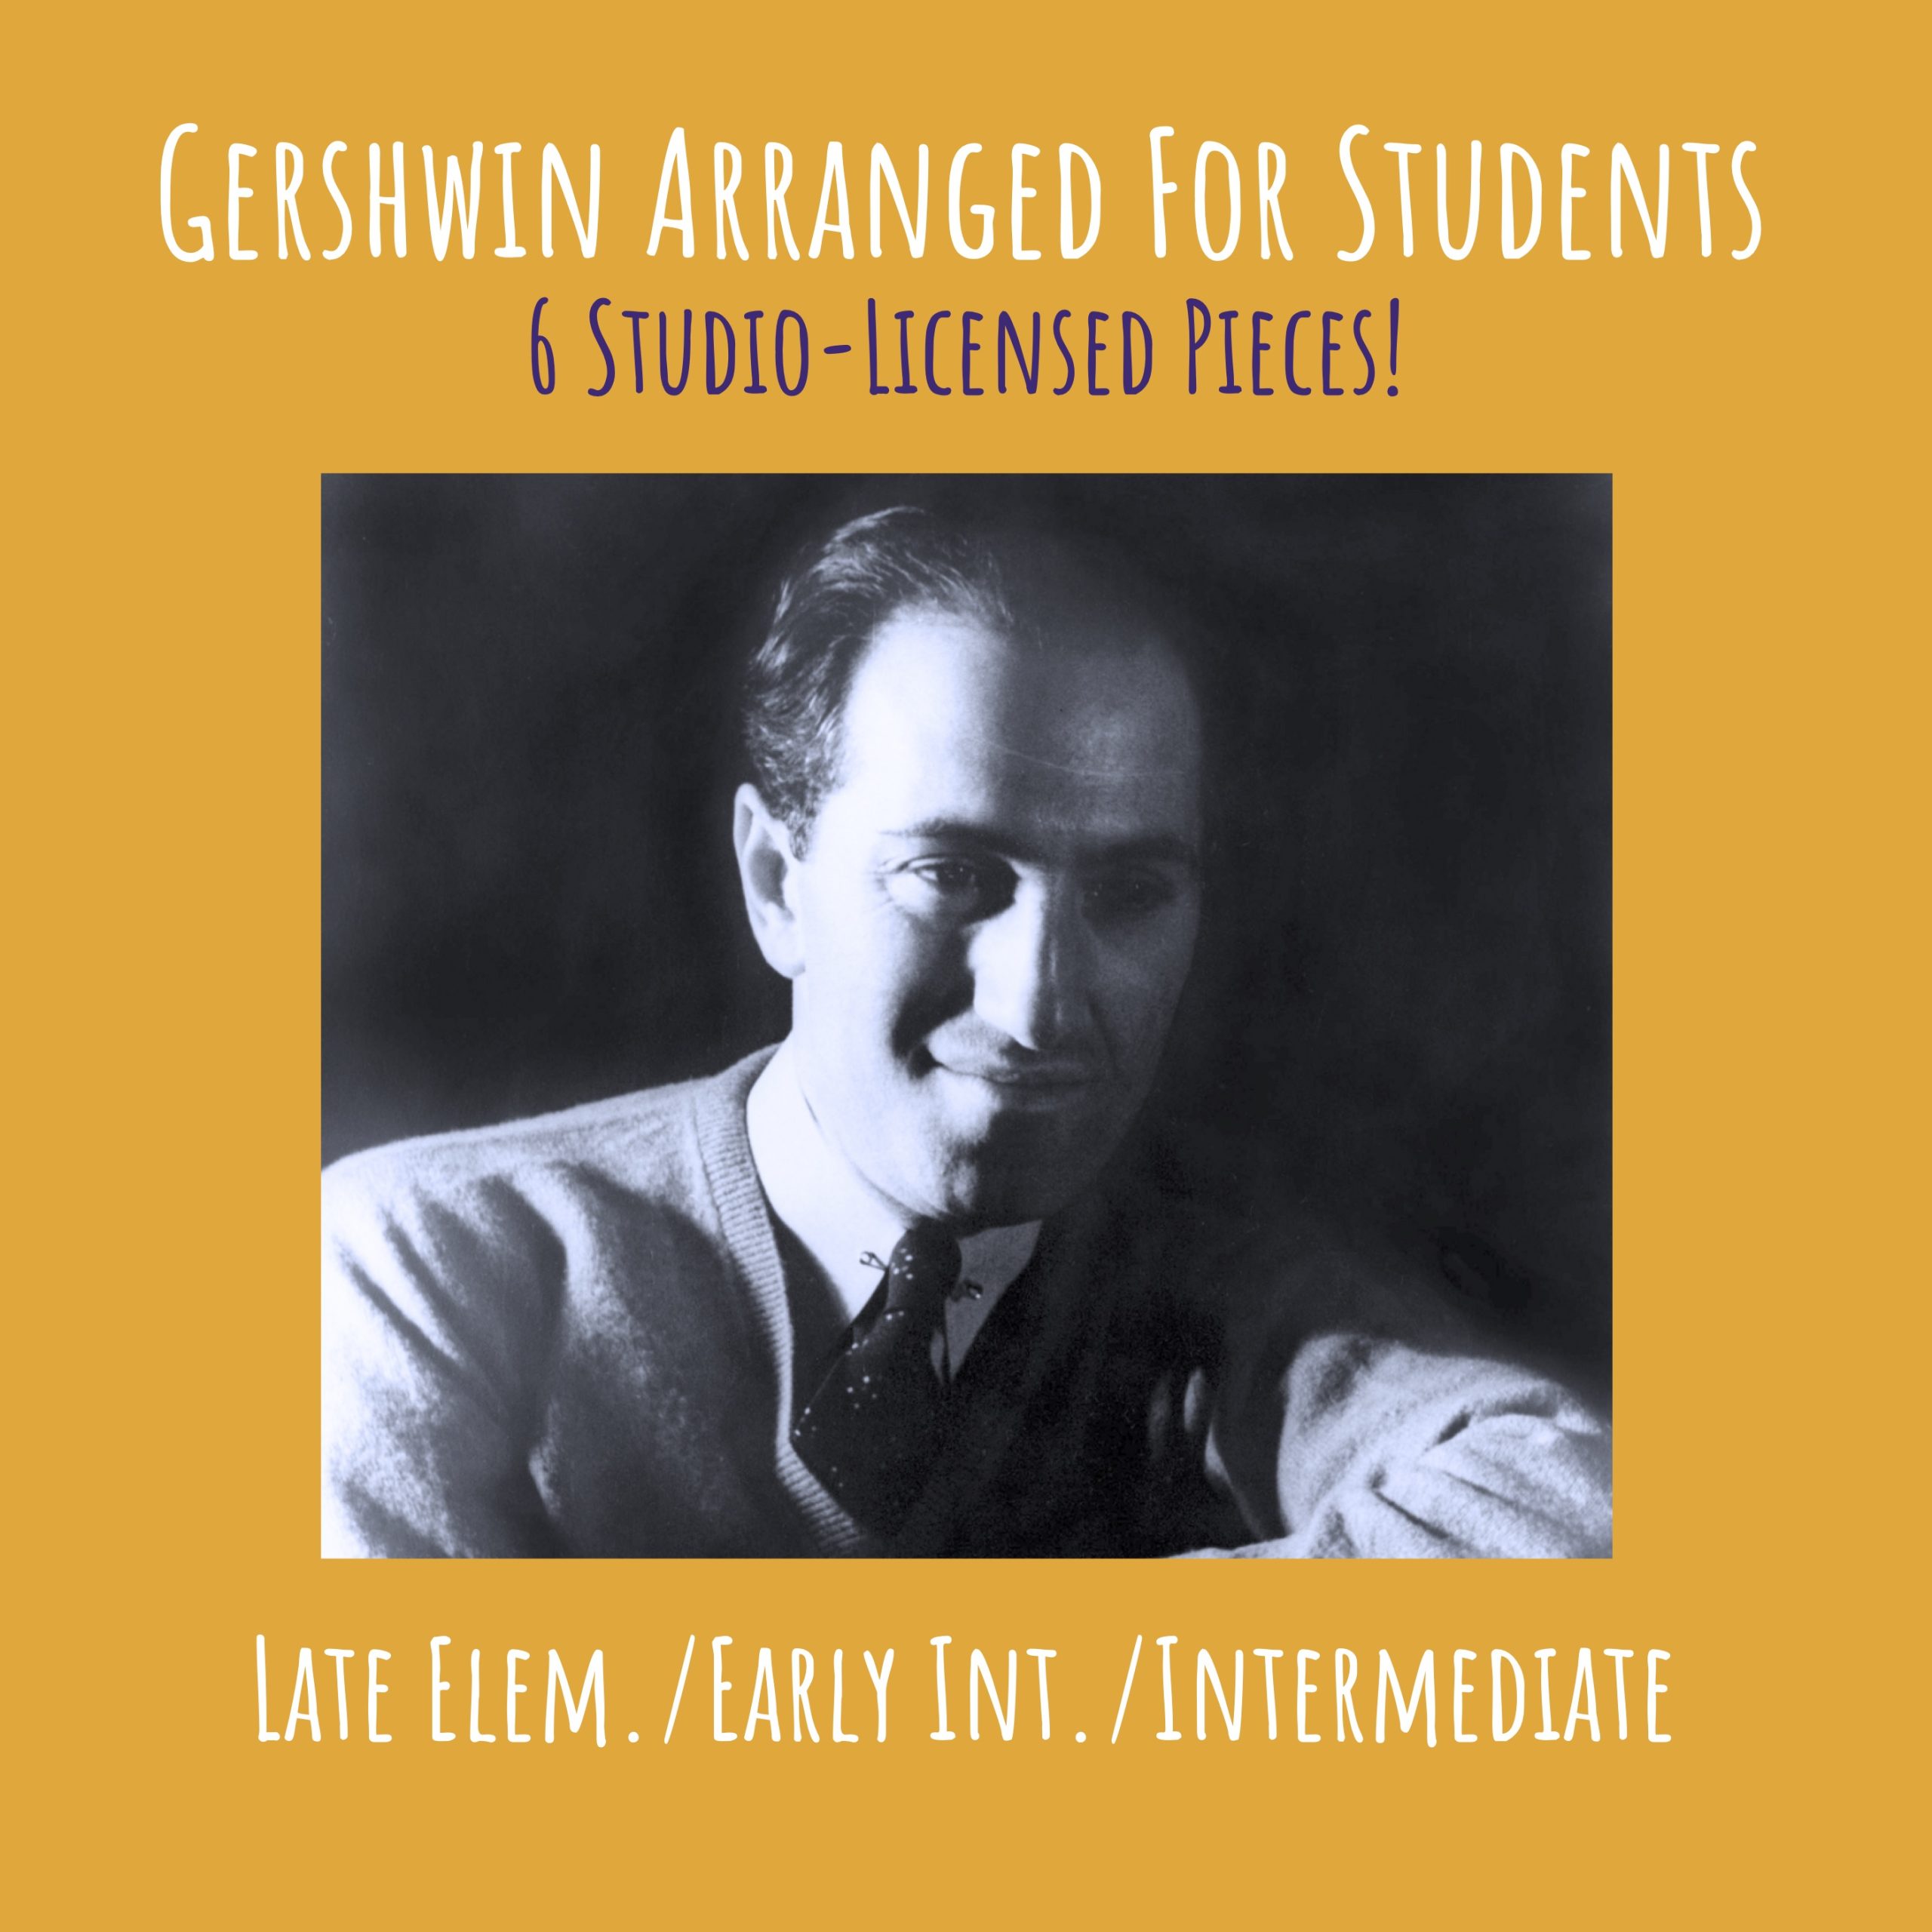 “Gershwin Arranged for Students” Digital Download with Studio License Cover Art